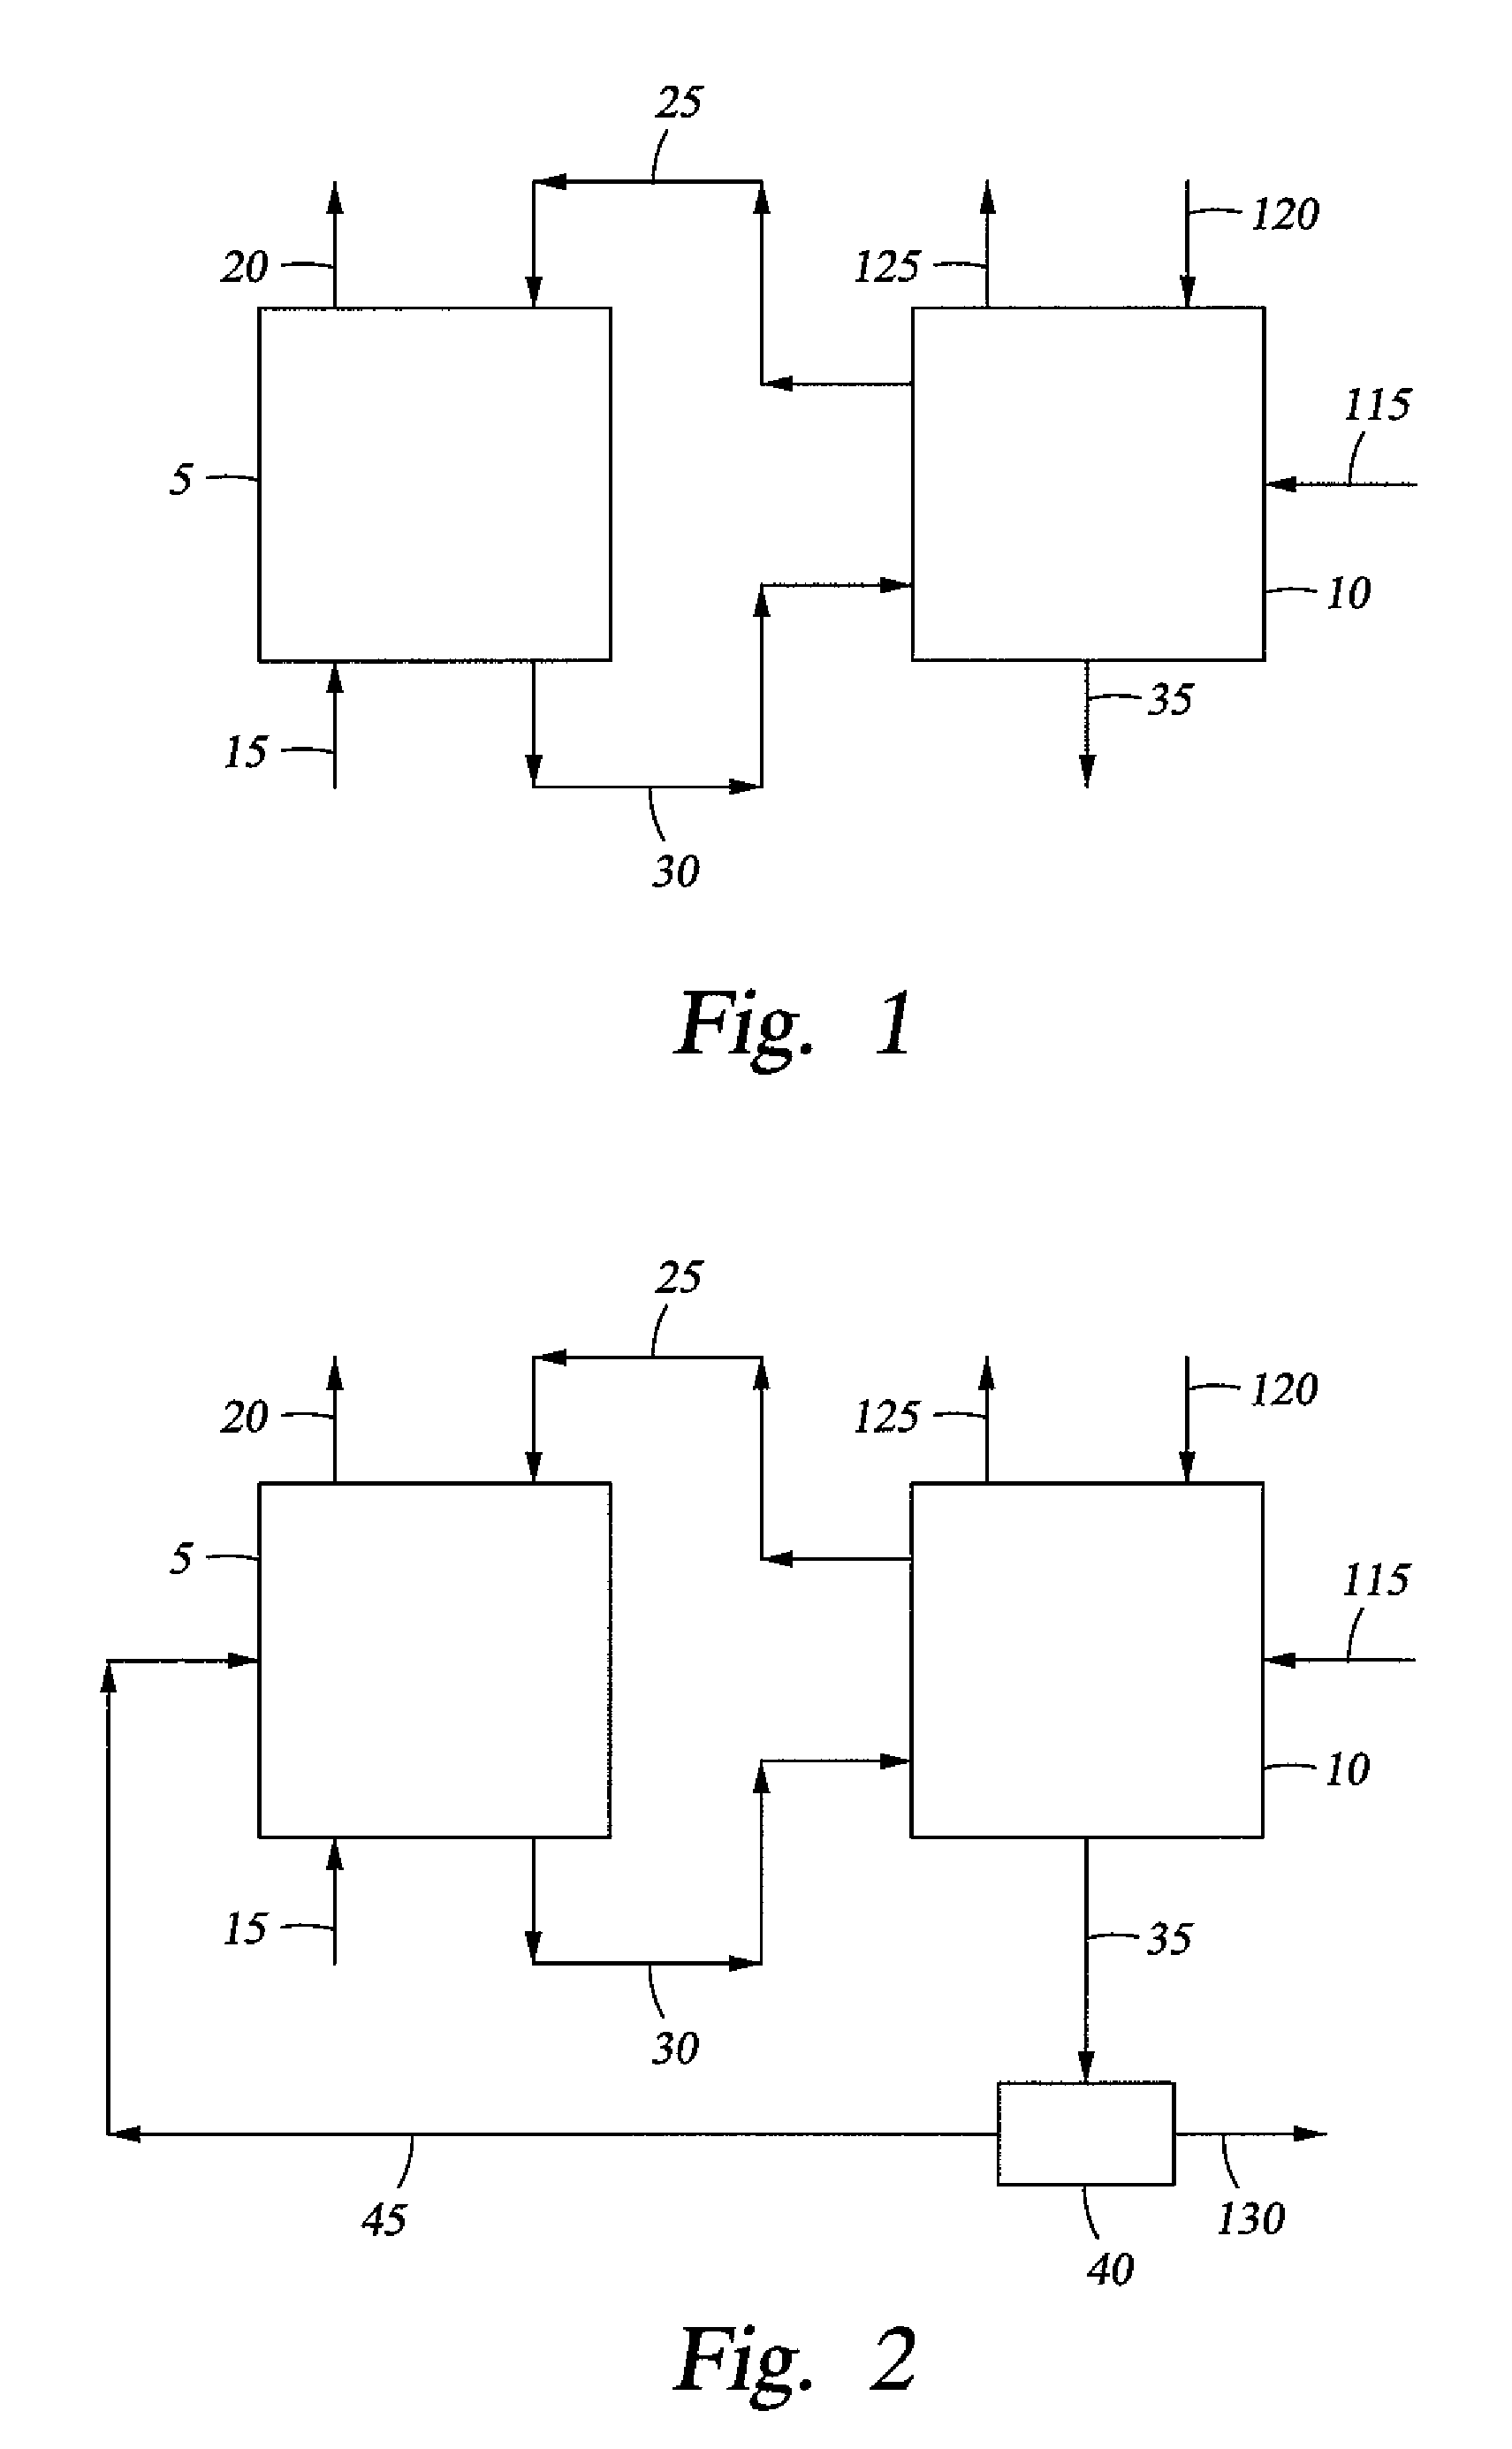 Electrochemical process for decomposition of hydrogen sulfide and production of sulfur